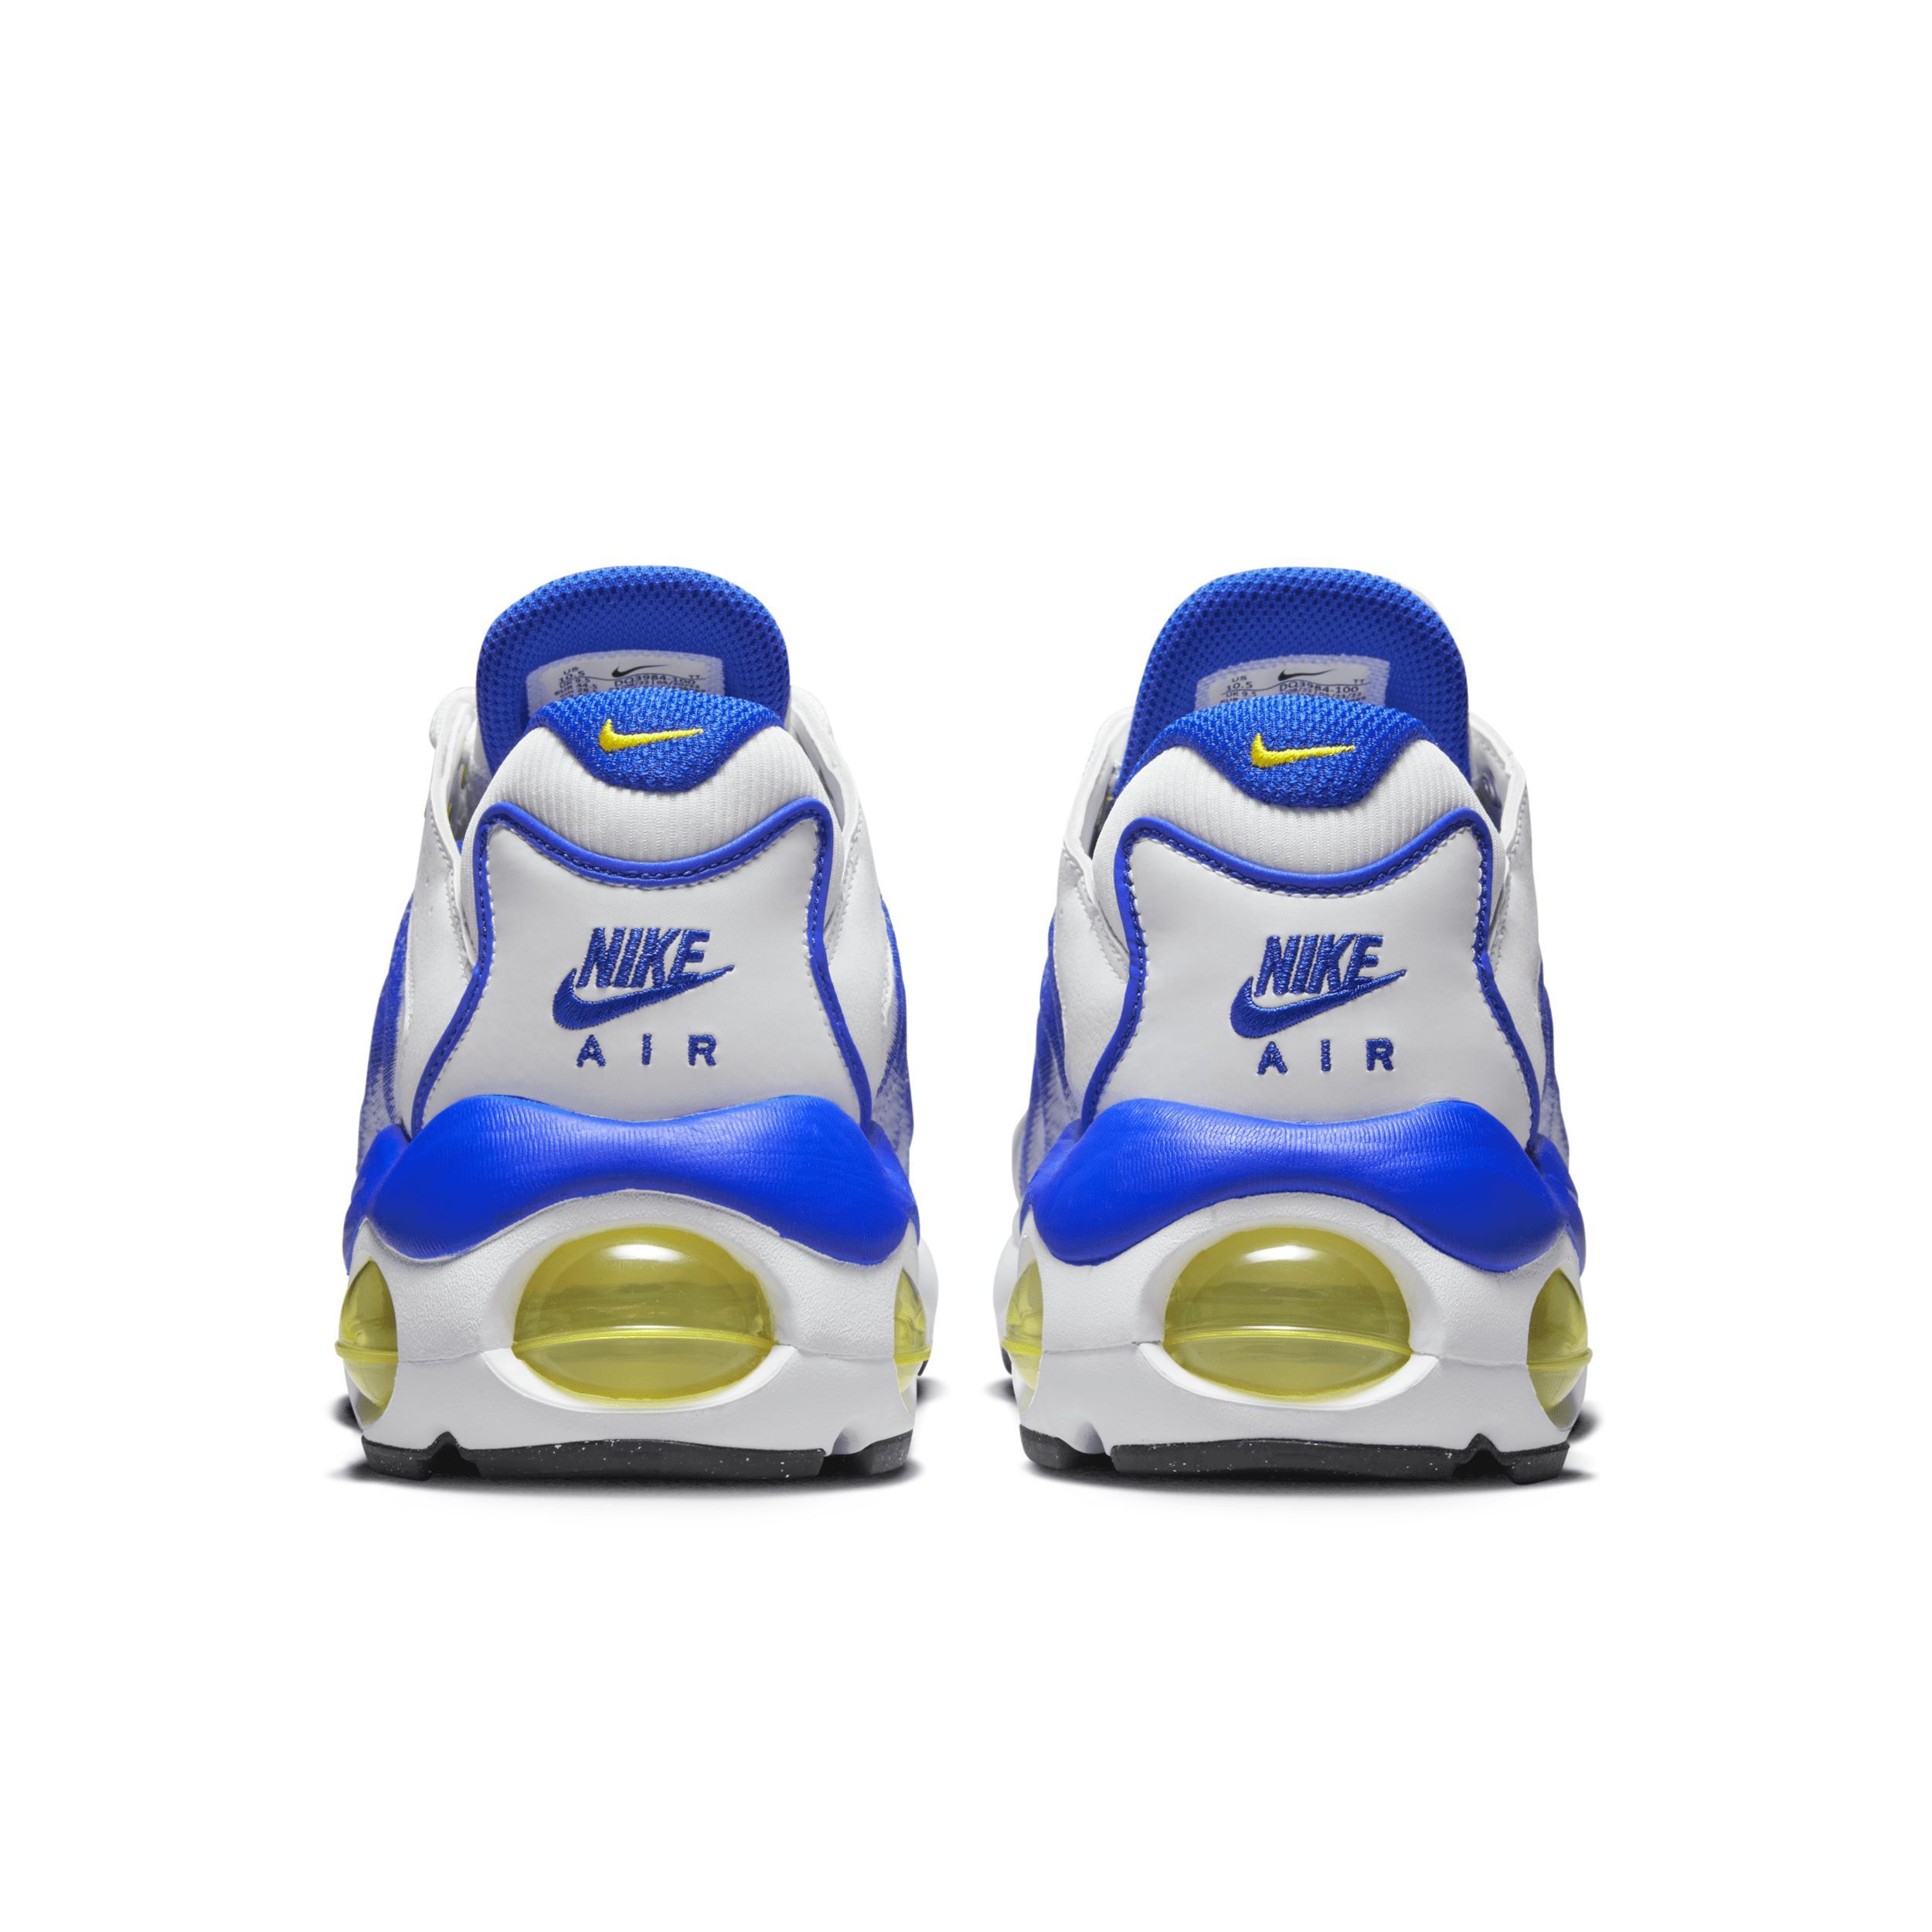 Nike Men's Air Max TW Shoes Product Image